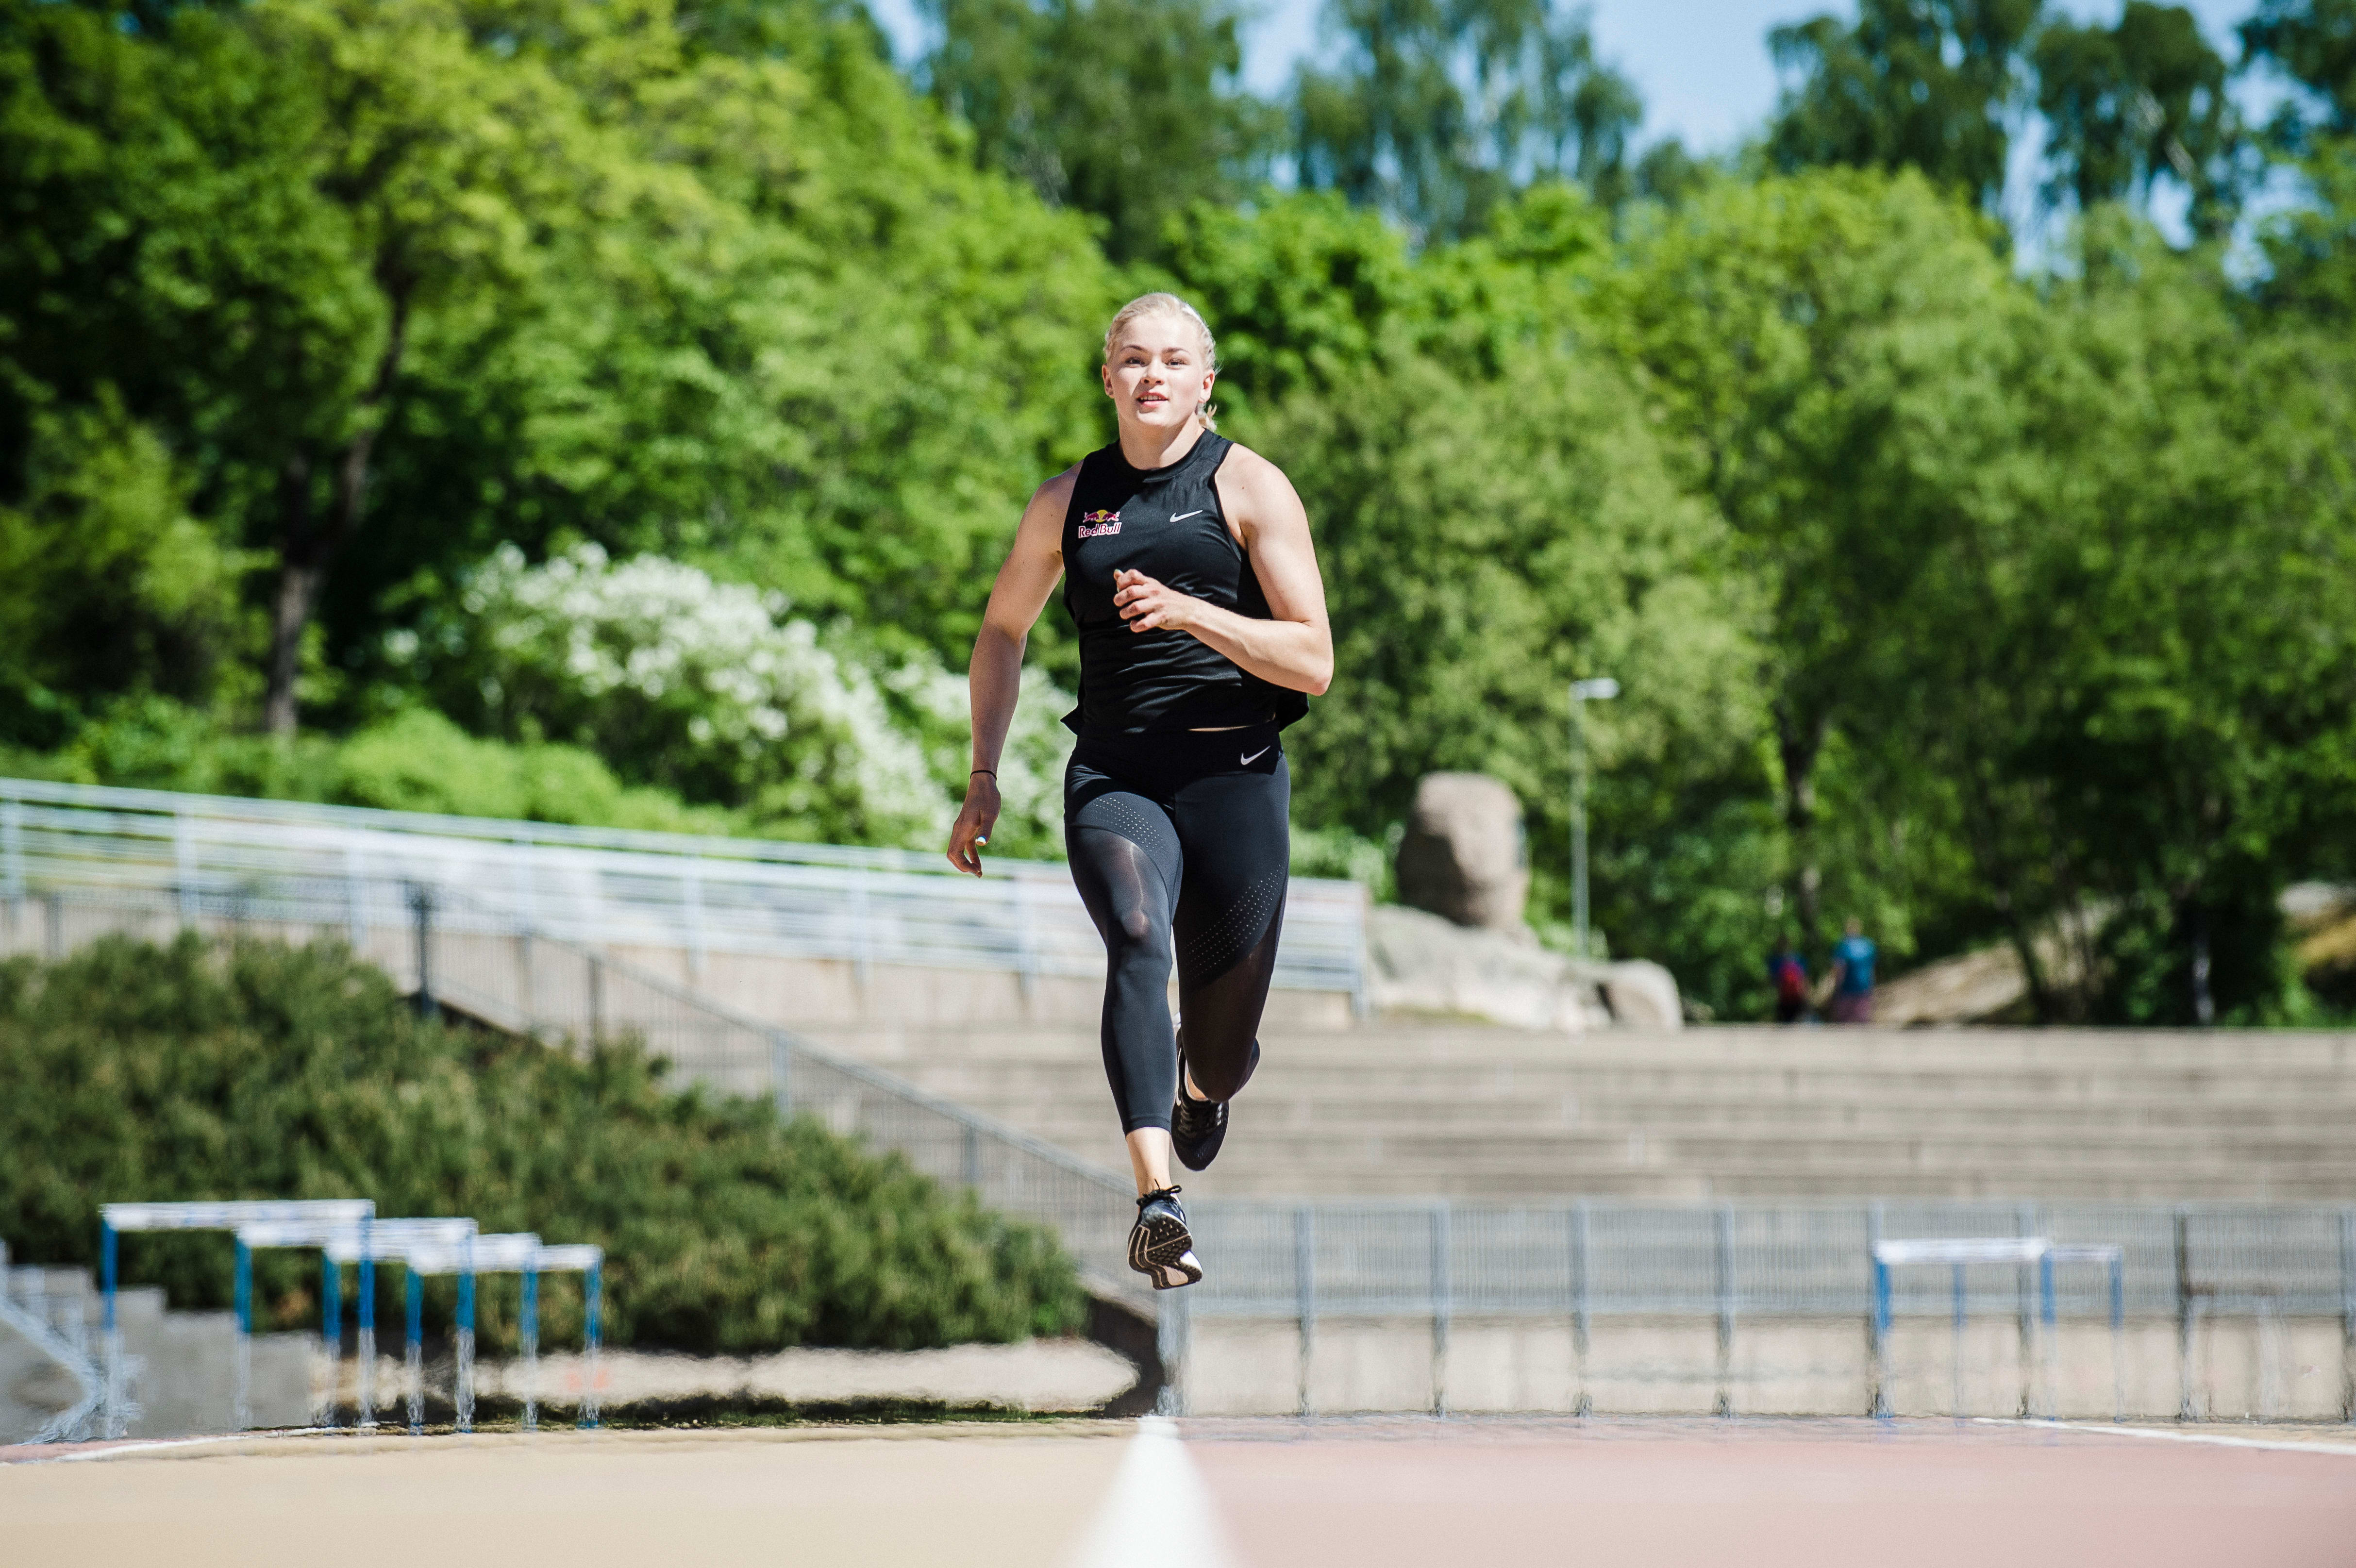 10 Agility Exercises to Speed Up Your Performance